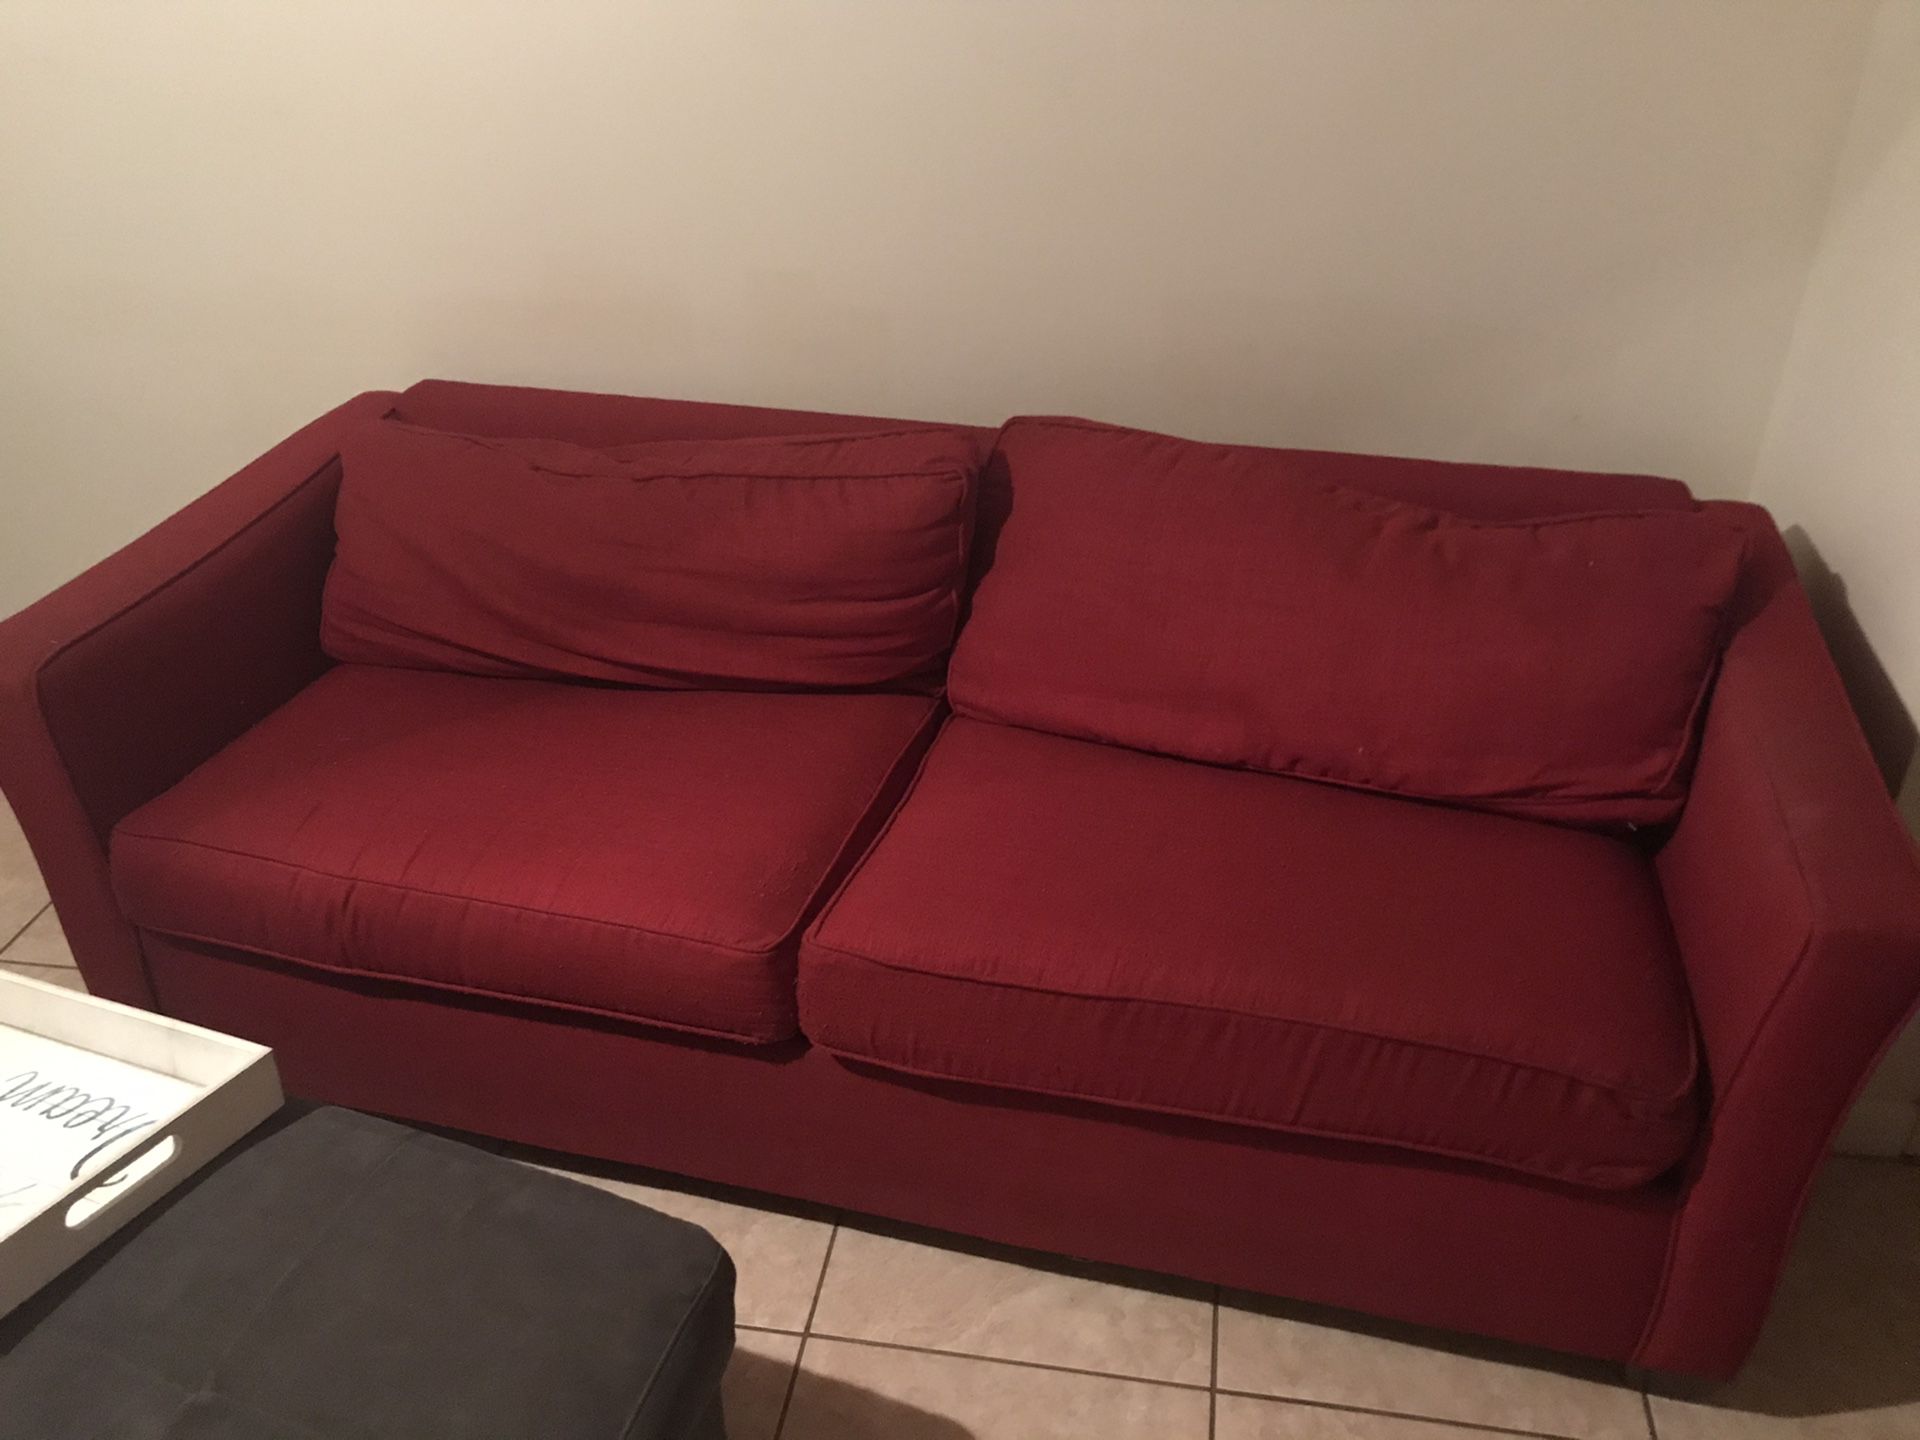 Free red couch - must pickup ( will need truck and another person )